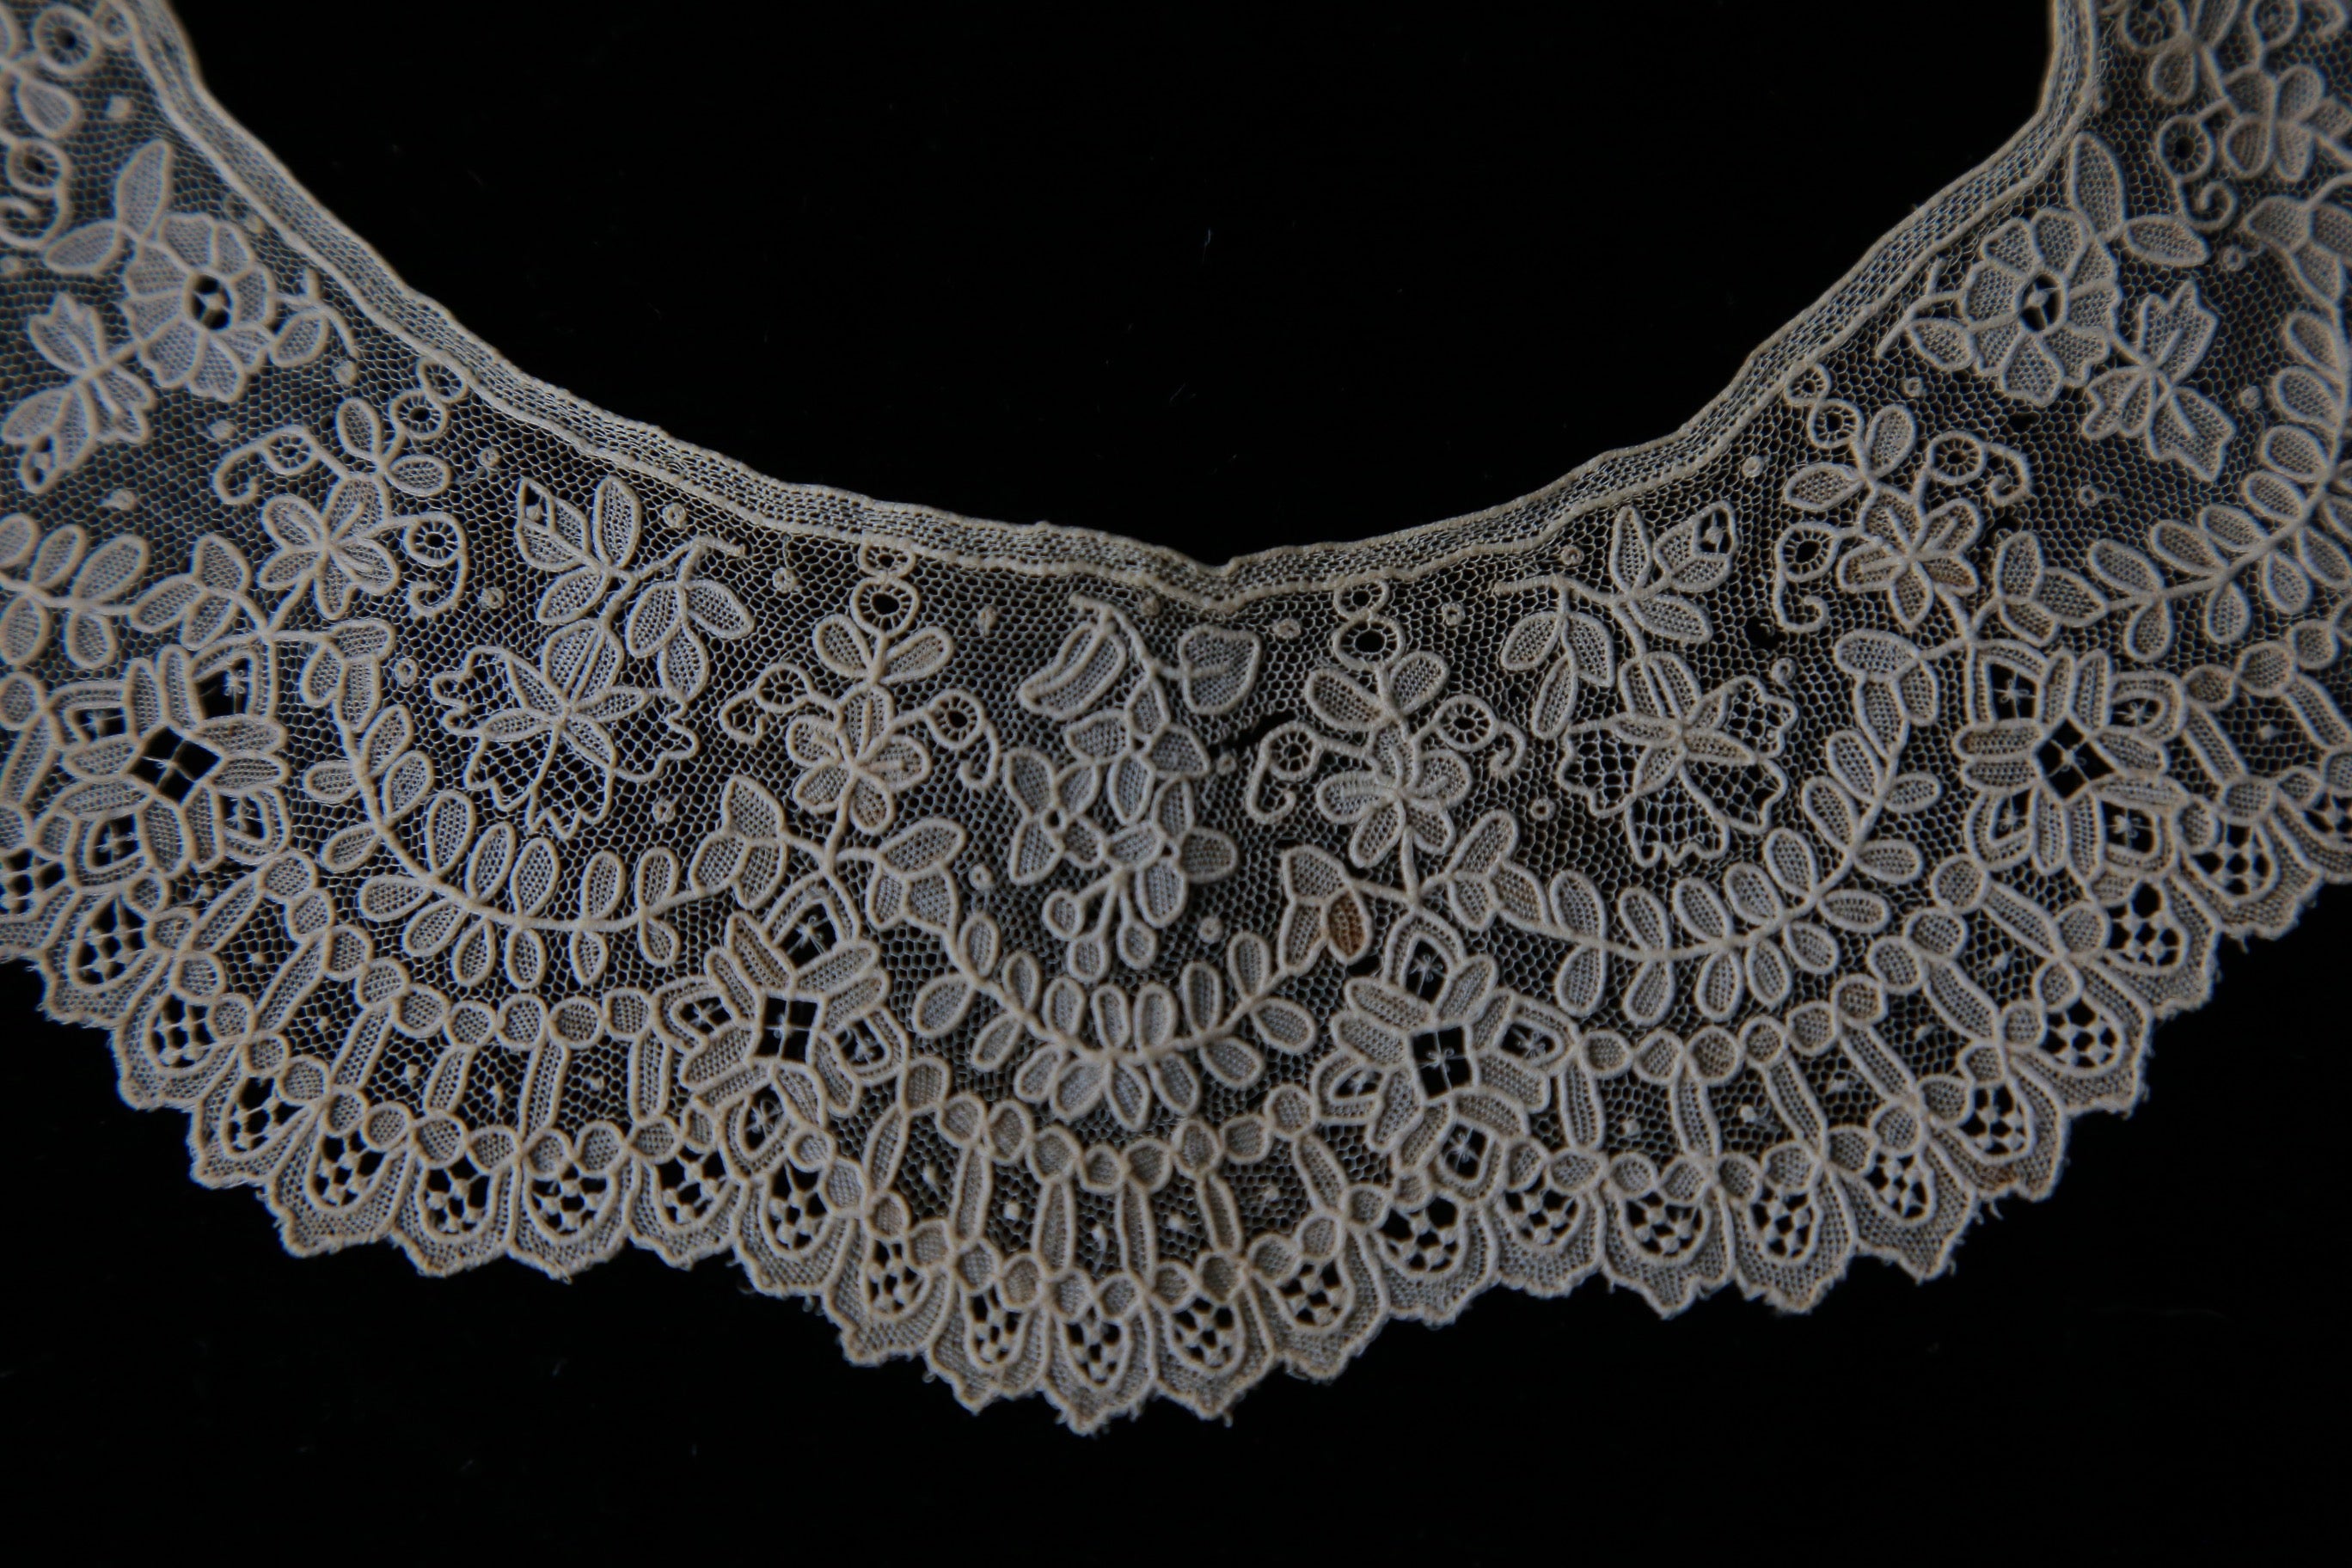 Early antique lace Point de Gaze collar 1800s handmade heirloom lace